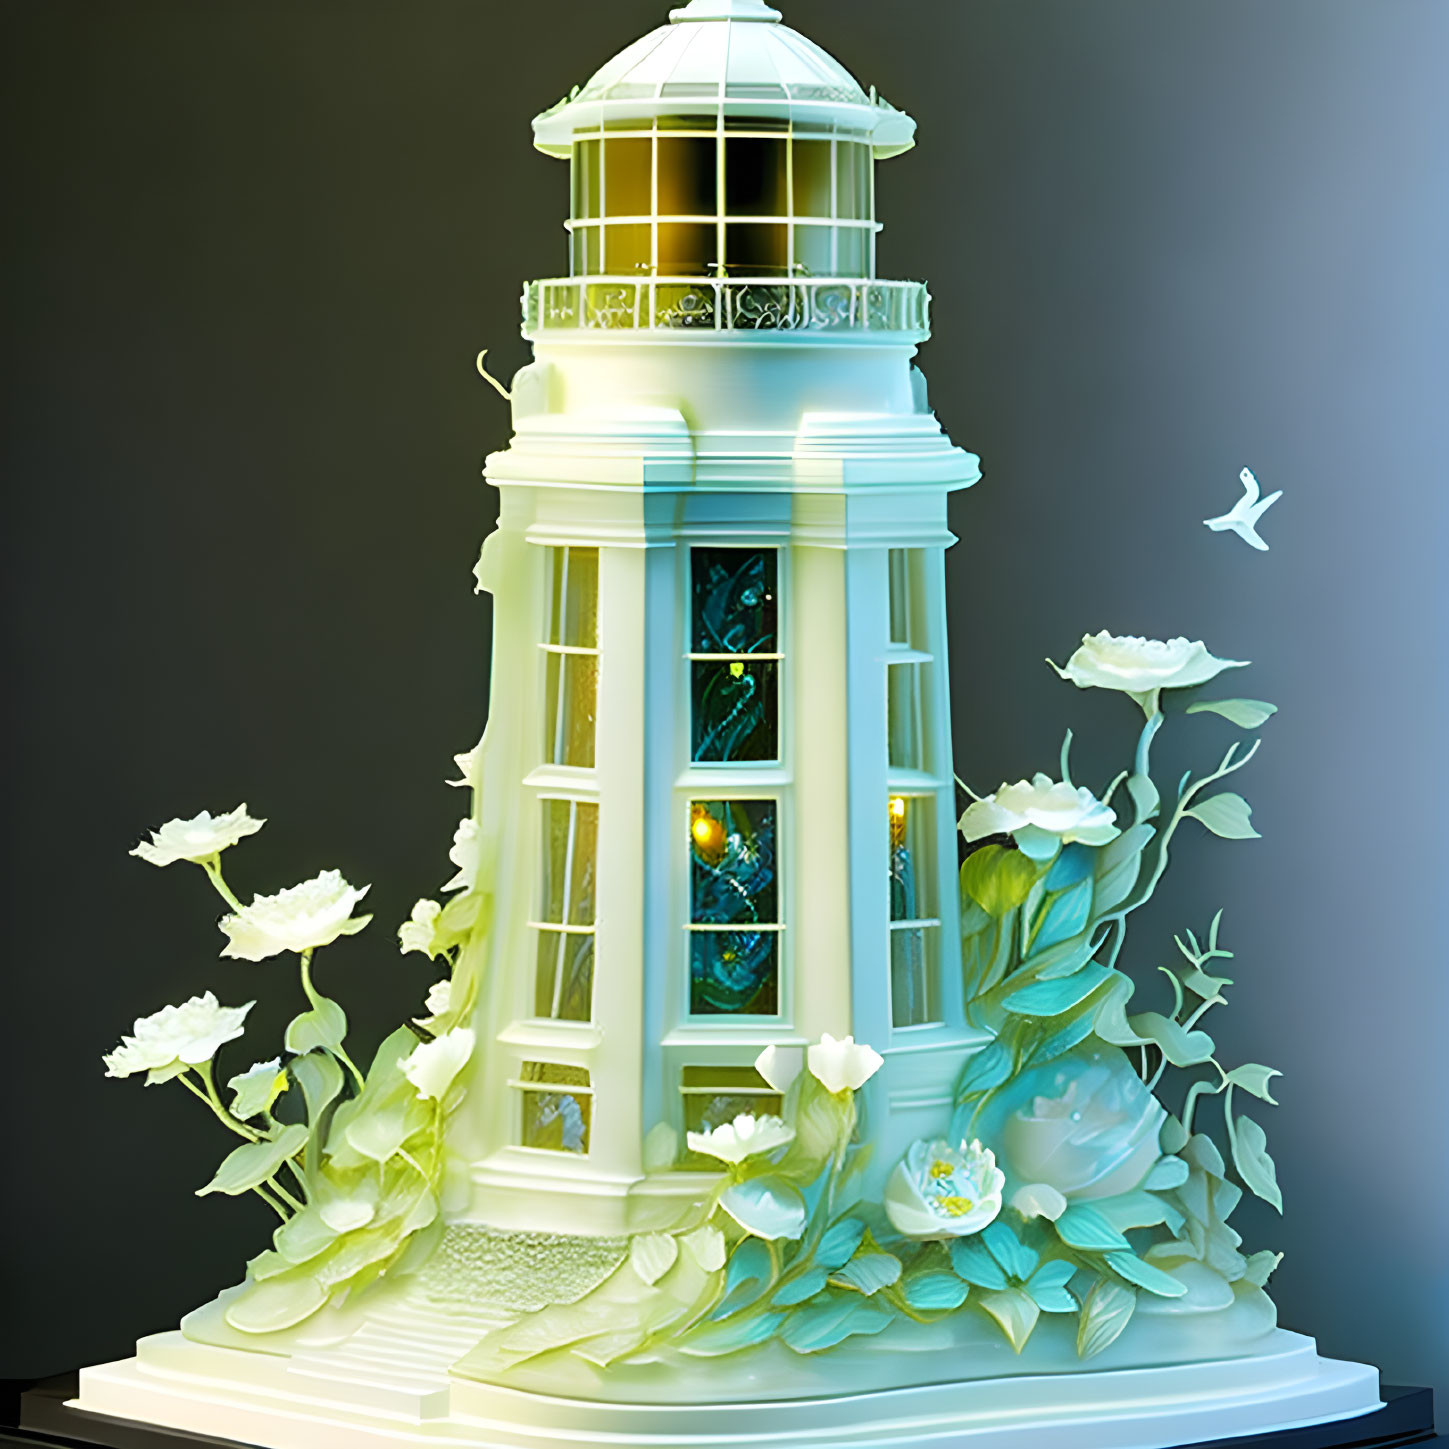 Illustrated lighthouse with green vines and white flowers in soft glow on dark background.